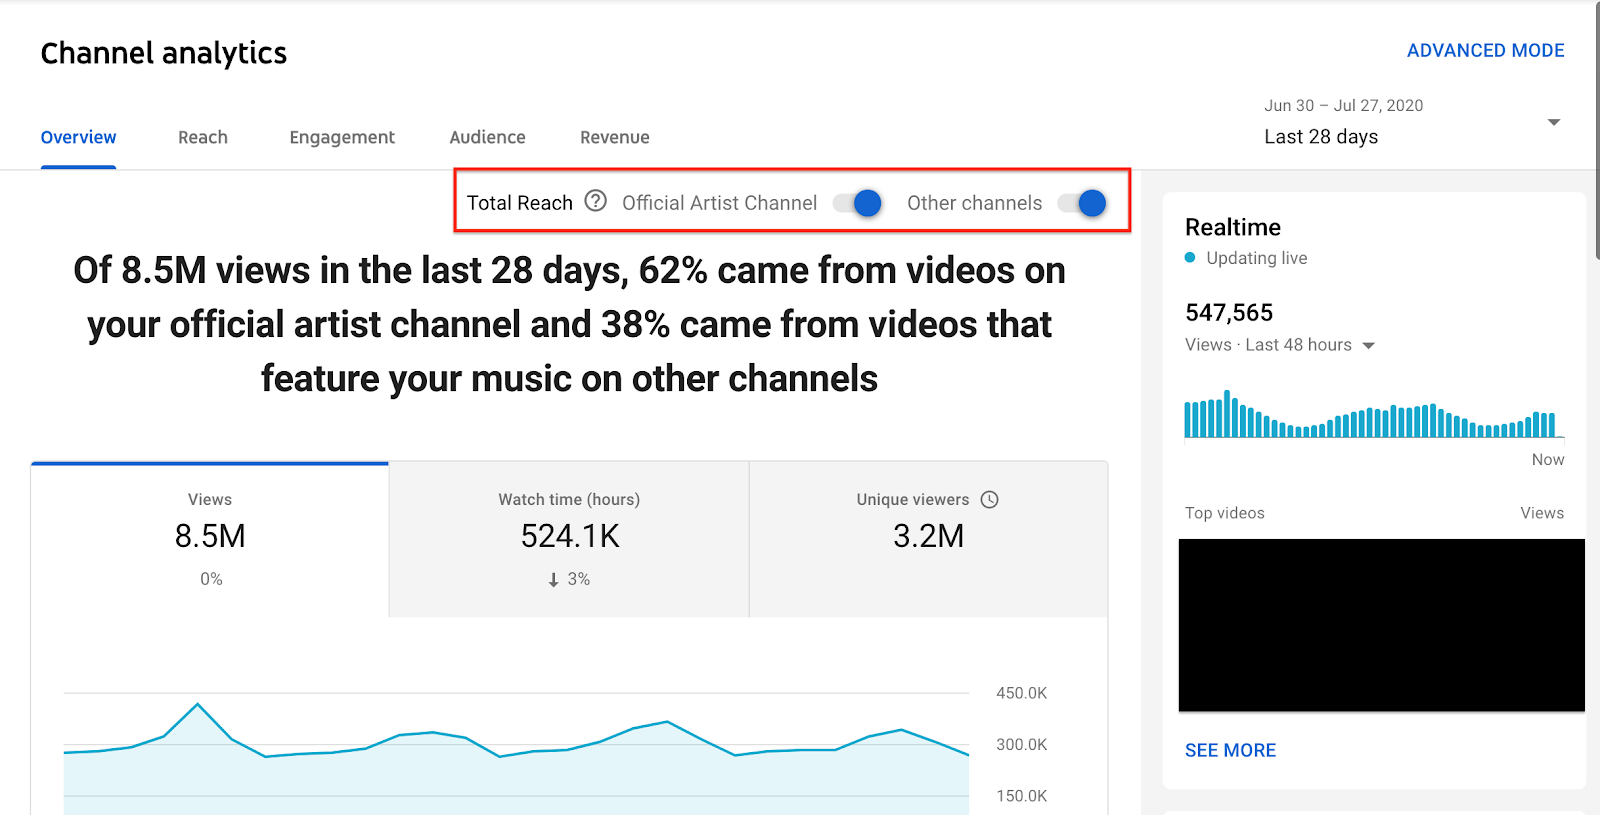 All Together Now: YouTube’s Artist Analytics Tool, with Music in Mind